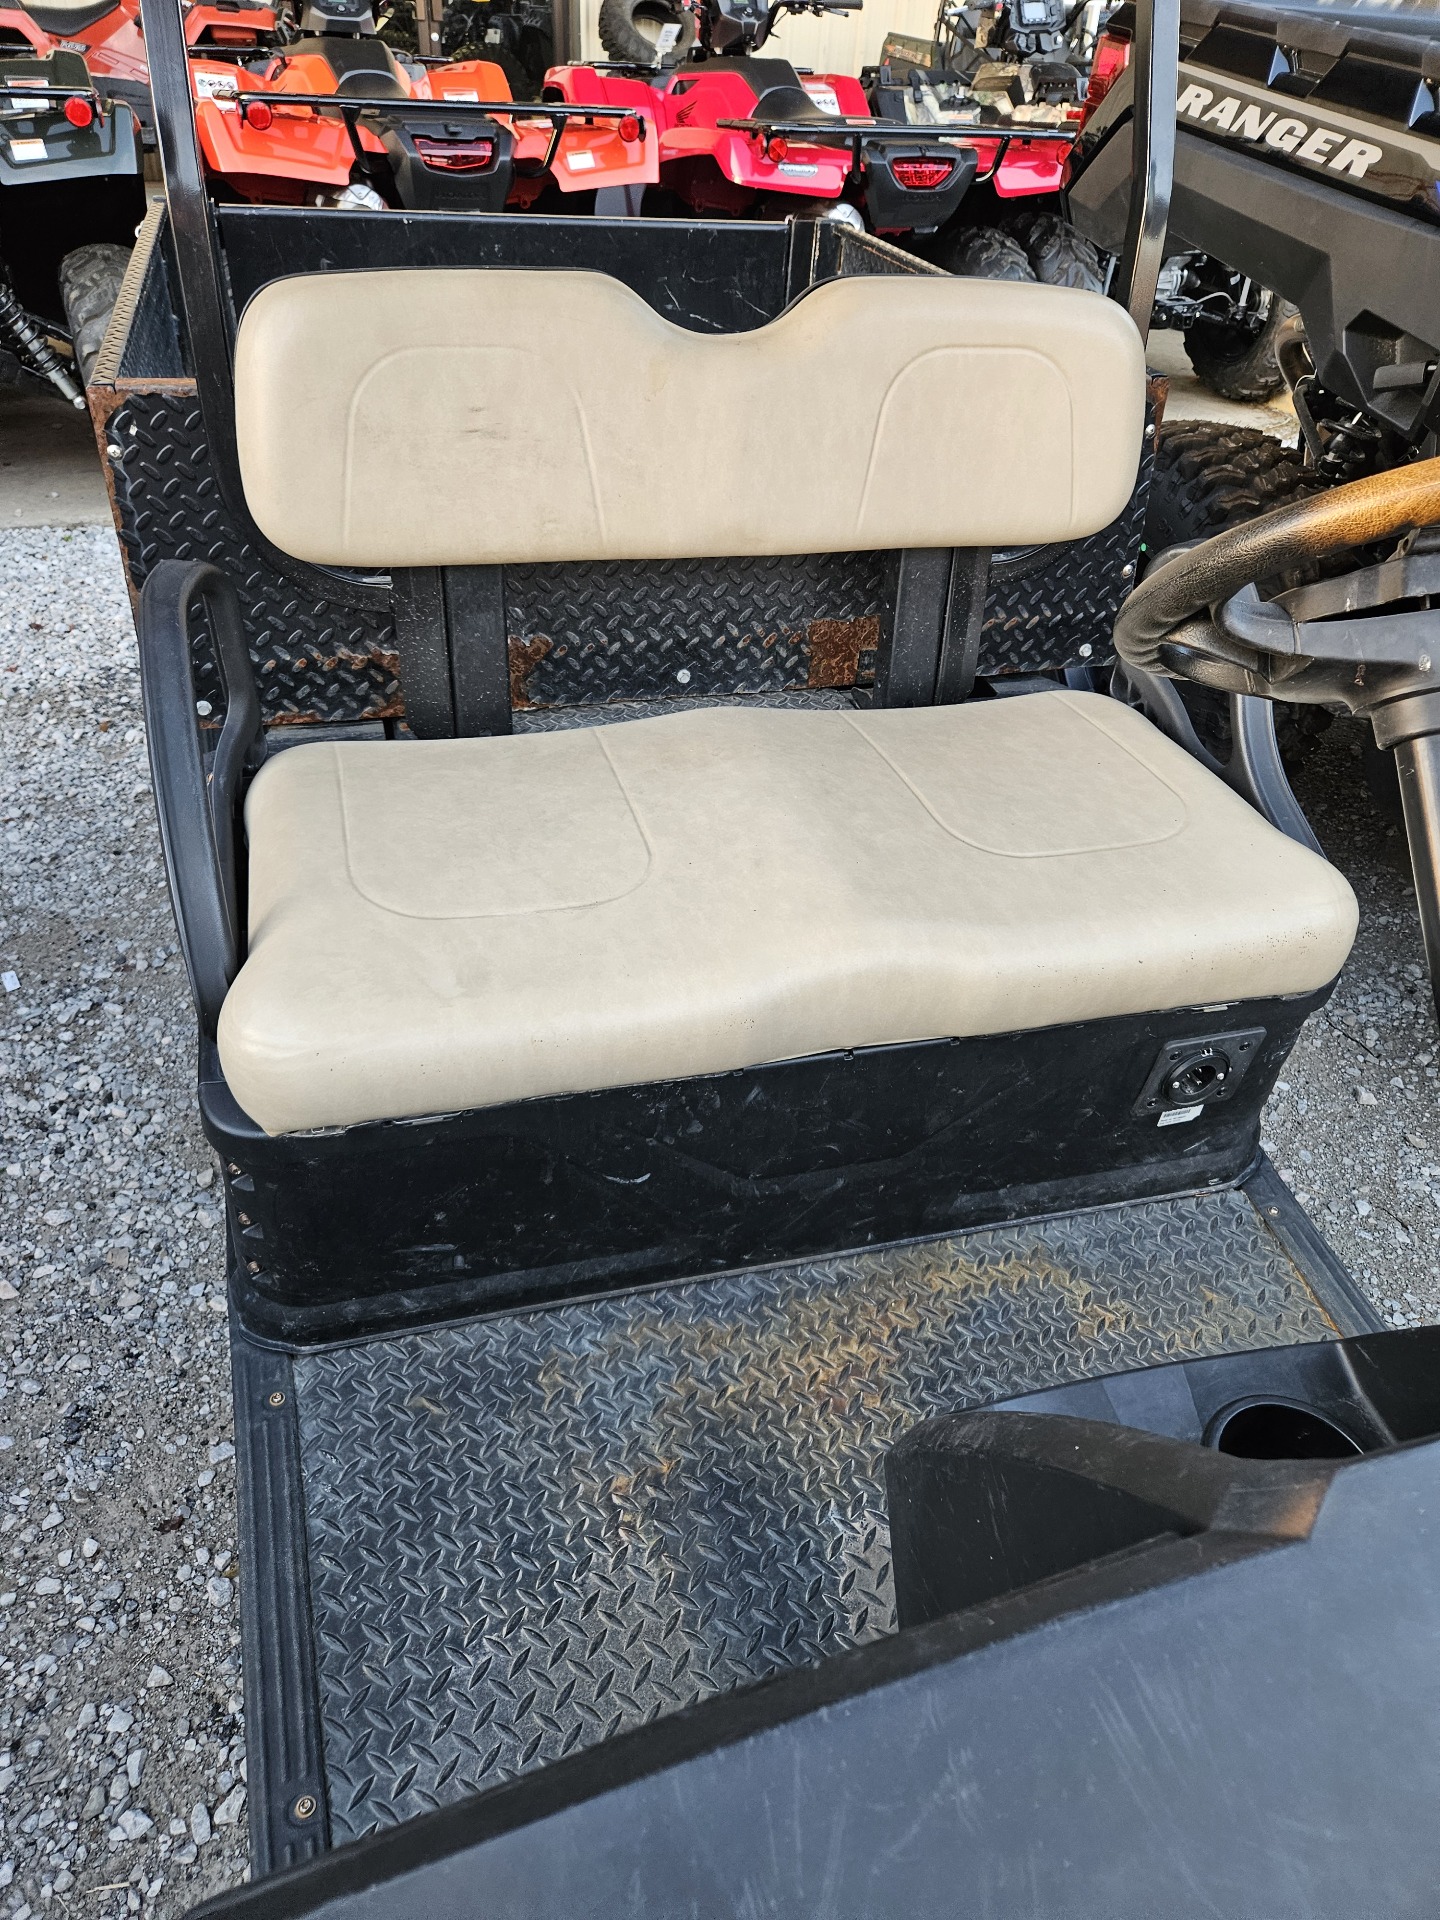 2019 Cushman Hauler Pro Electric in Winchester, Tennessee - Photo 3